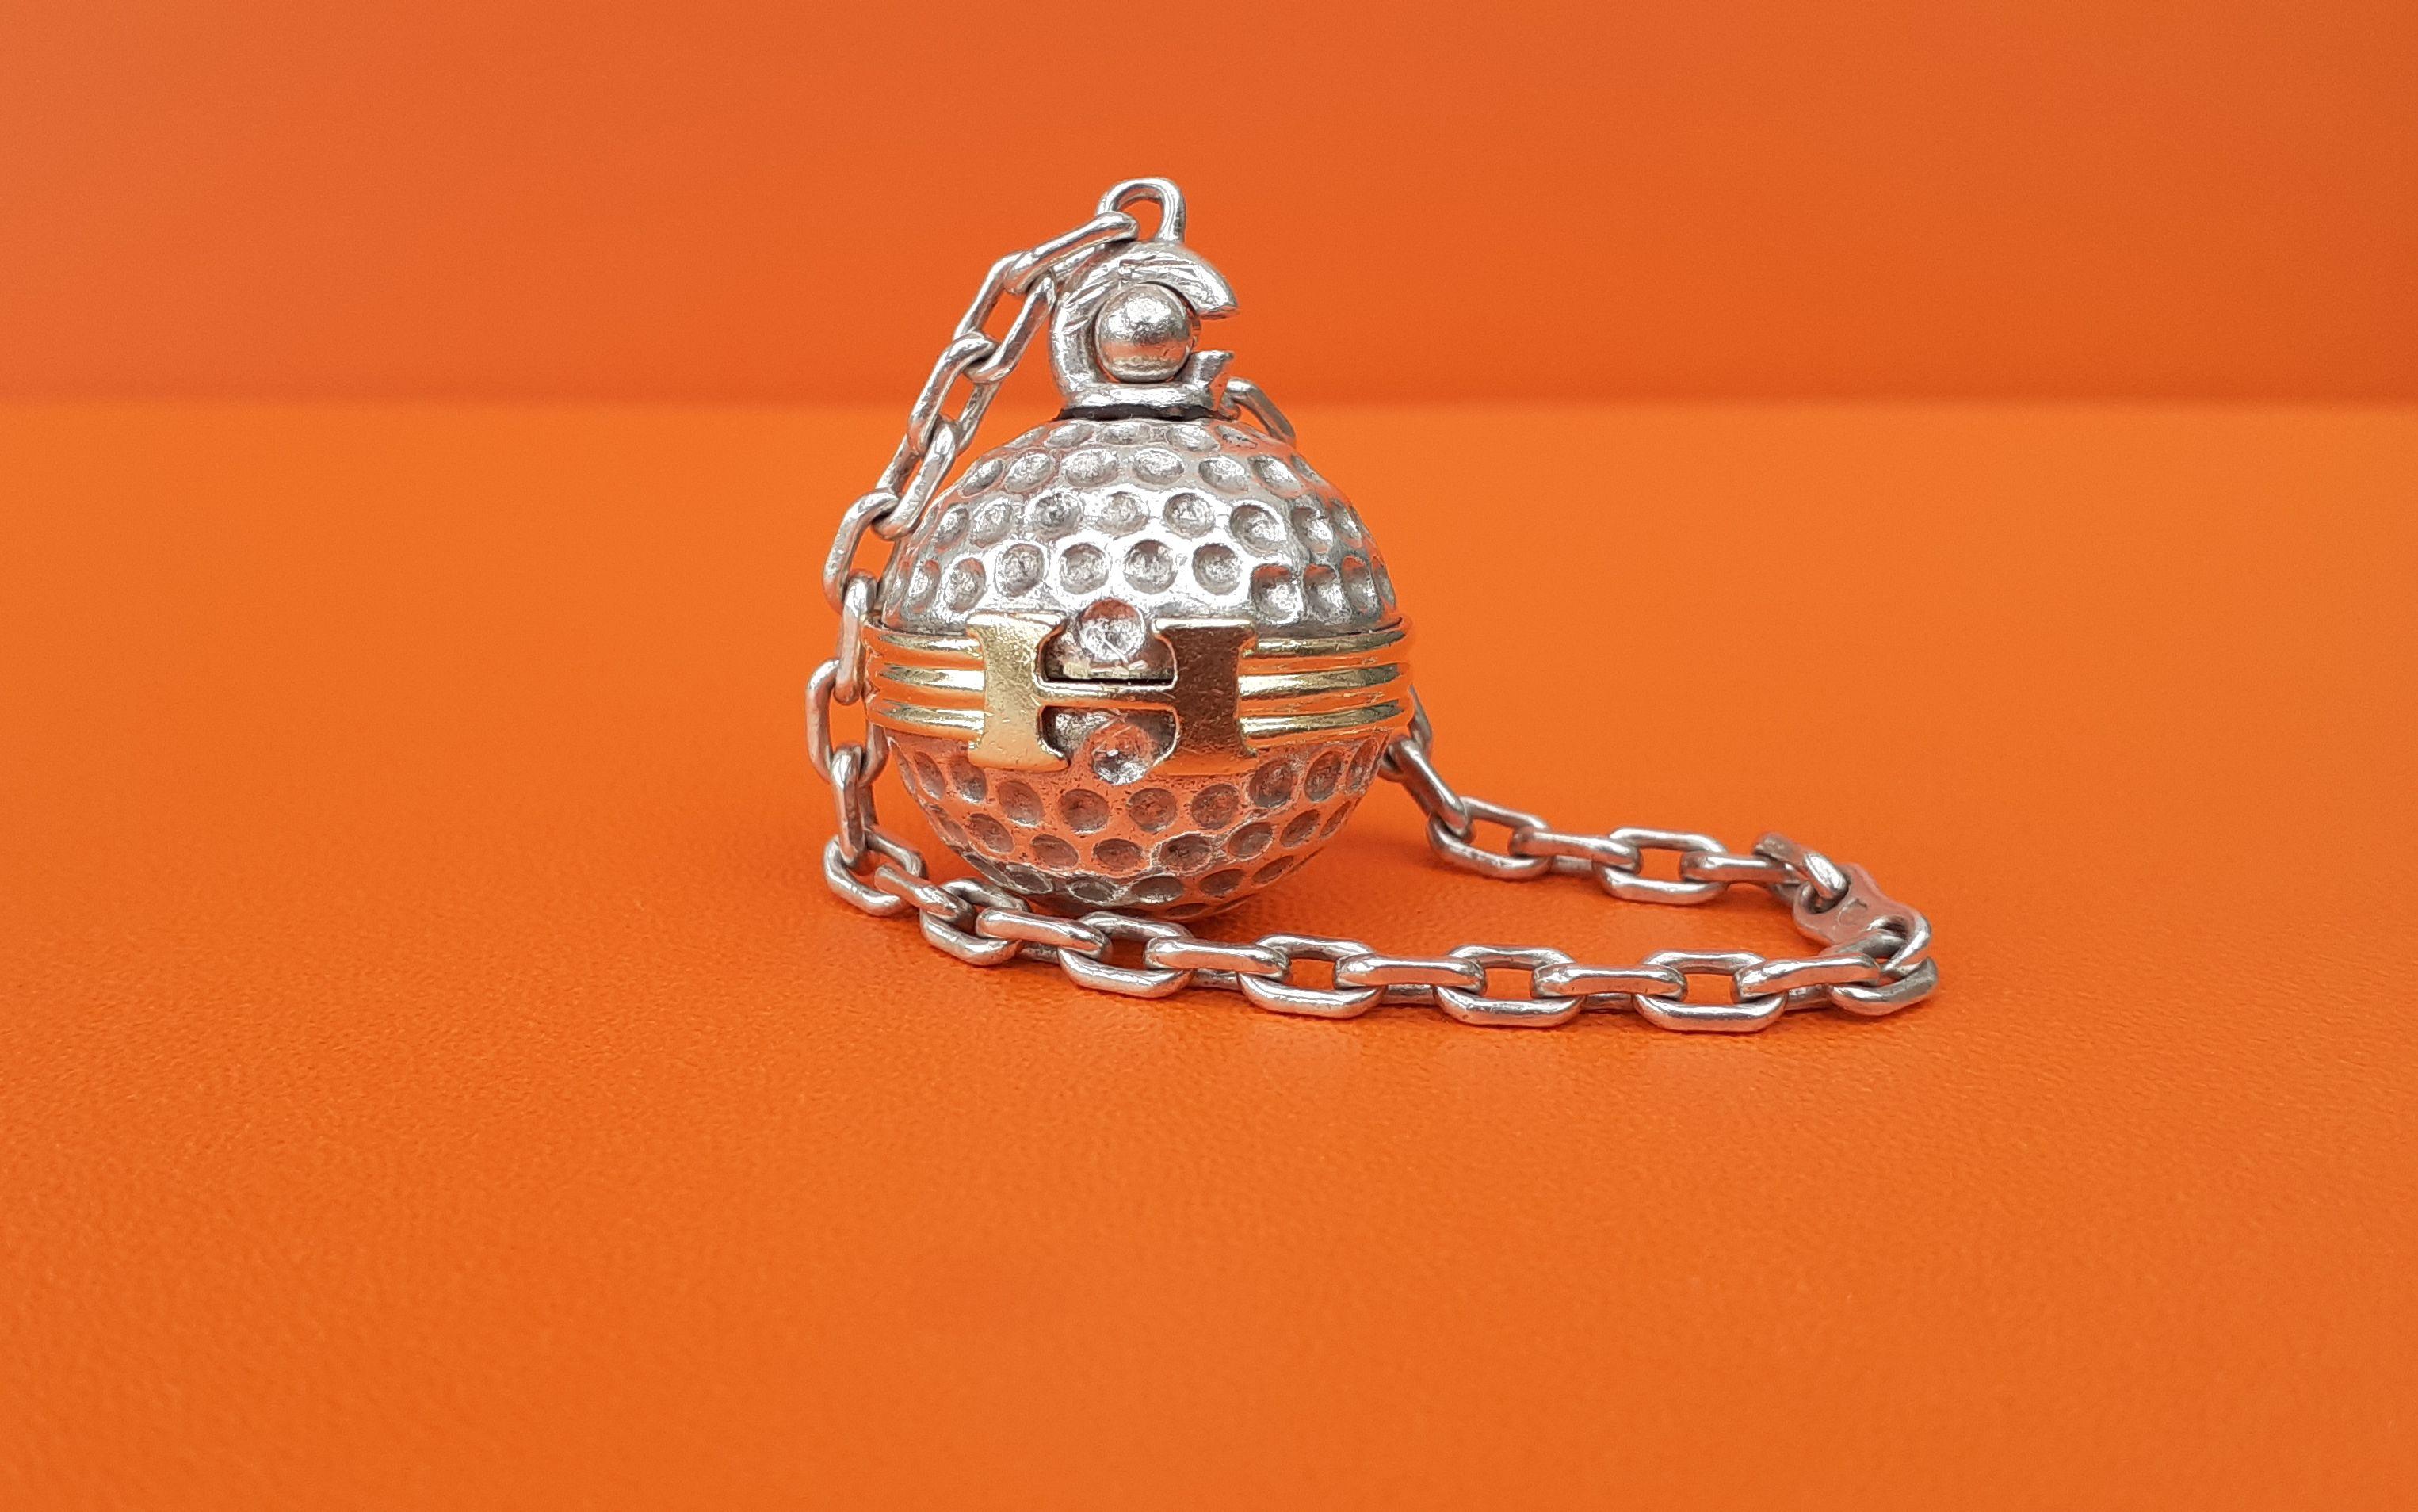 Rare Authentic Hermès Keychain

Shape of a Golf Ball, surrounded by golden belt with H buckle

Vintage item

Made of silver and vermeil

Colorways: silvery, golden

